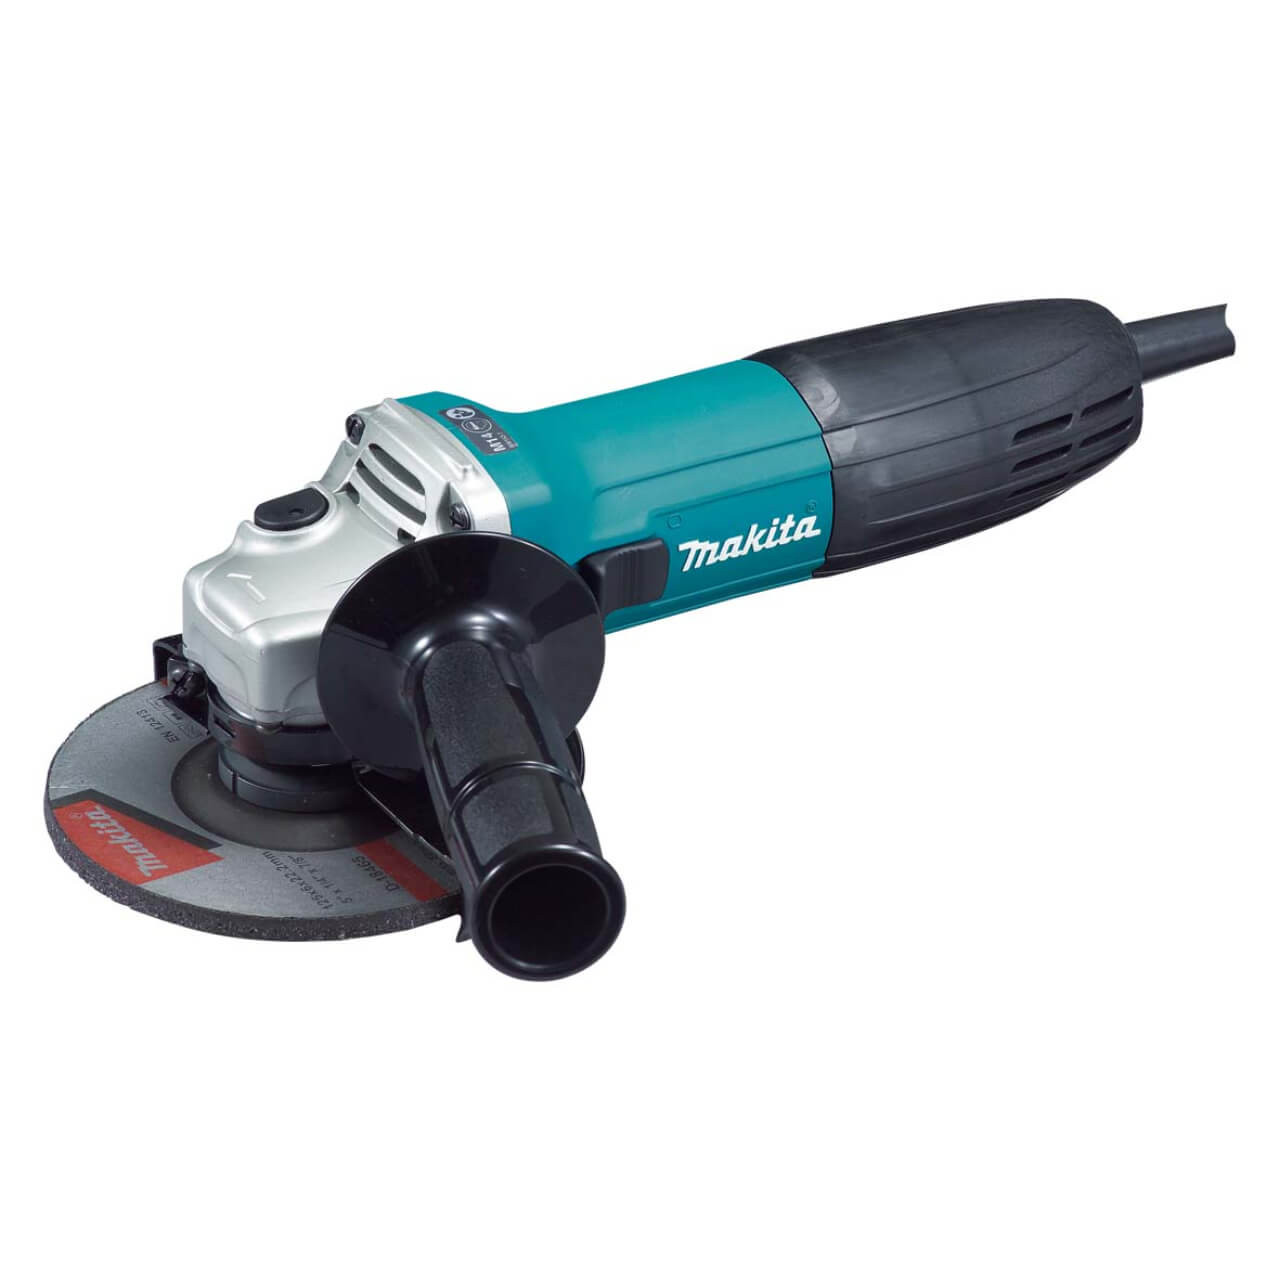 Makita 125mm (5”) Angle Grinder. 720W. 3x Grinding Discs. Case